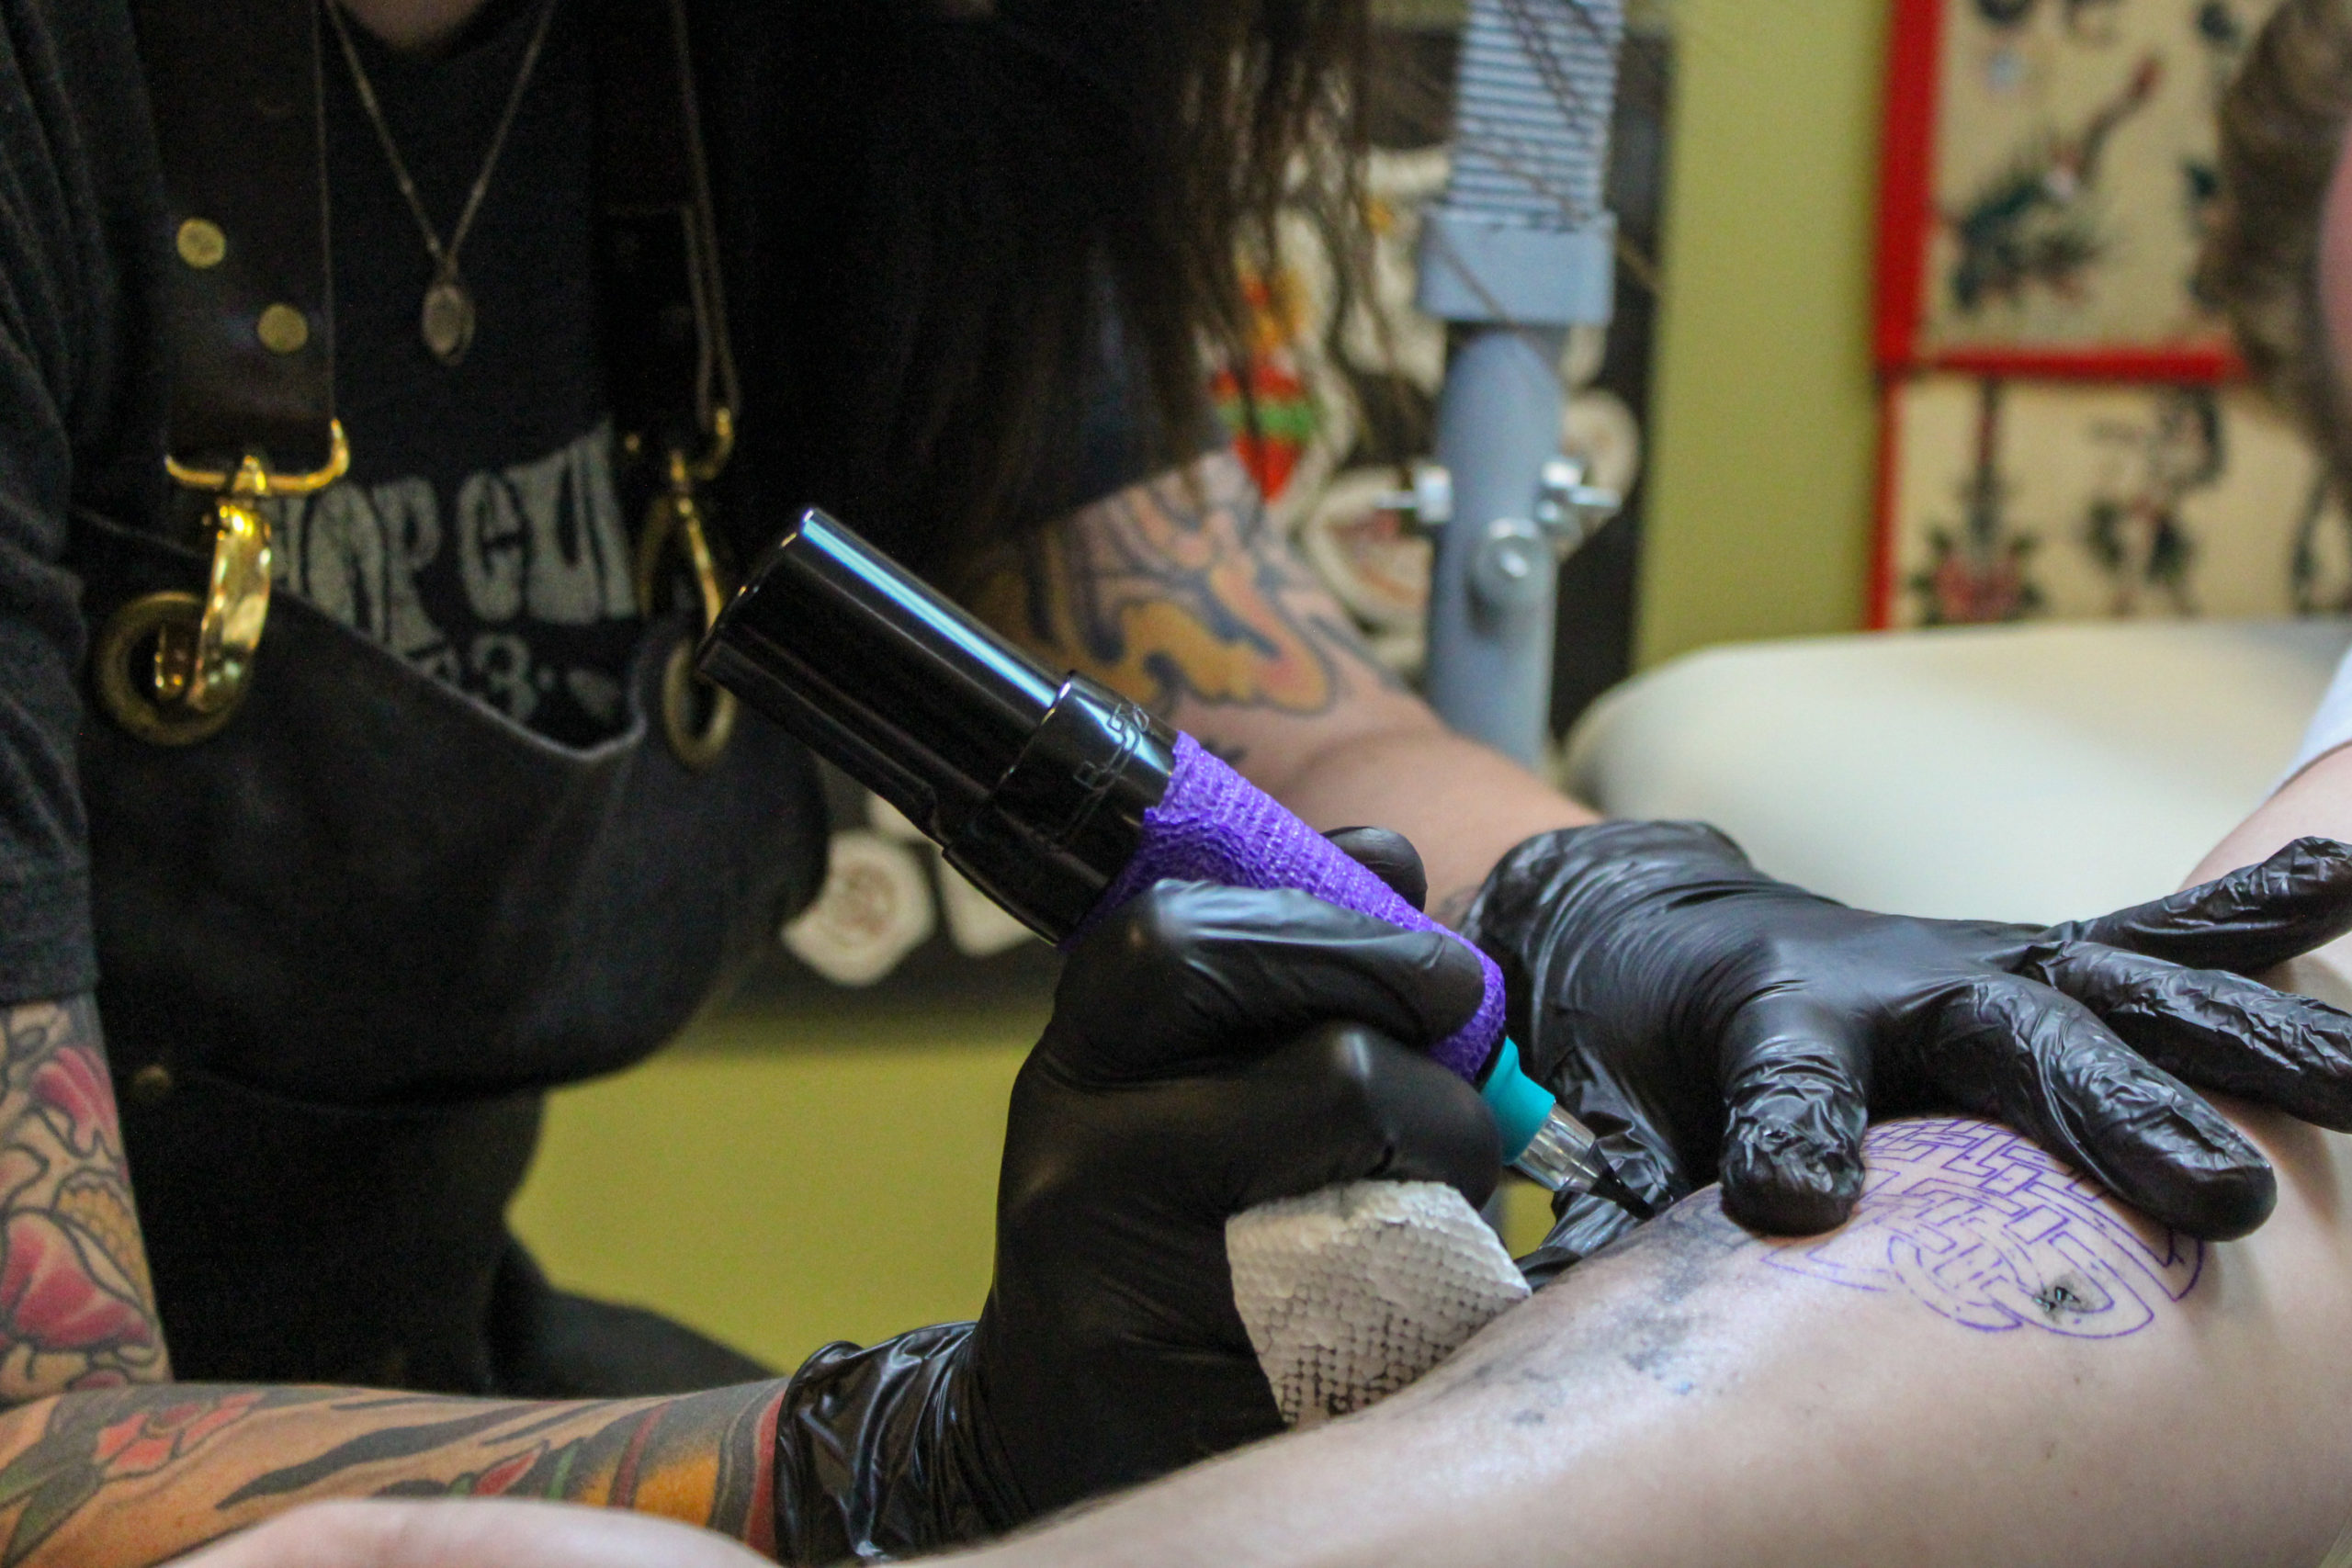 Ink 9 Tattoos and Body Piercing, 3701 Atlanta Hwy, Suite 31, Athens, GA -  MapQuest